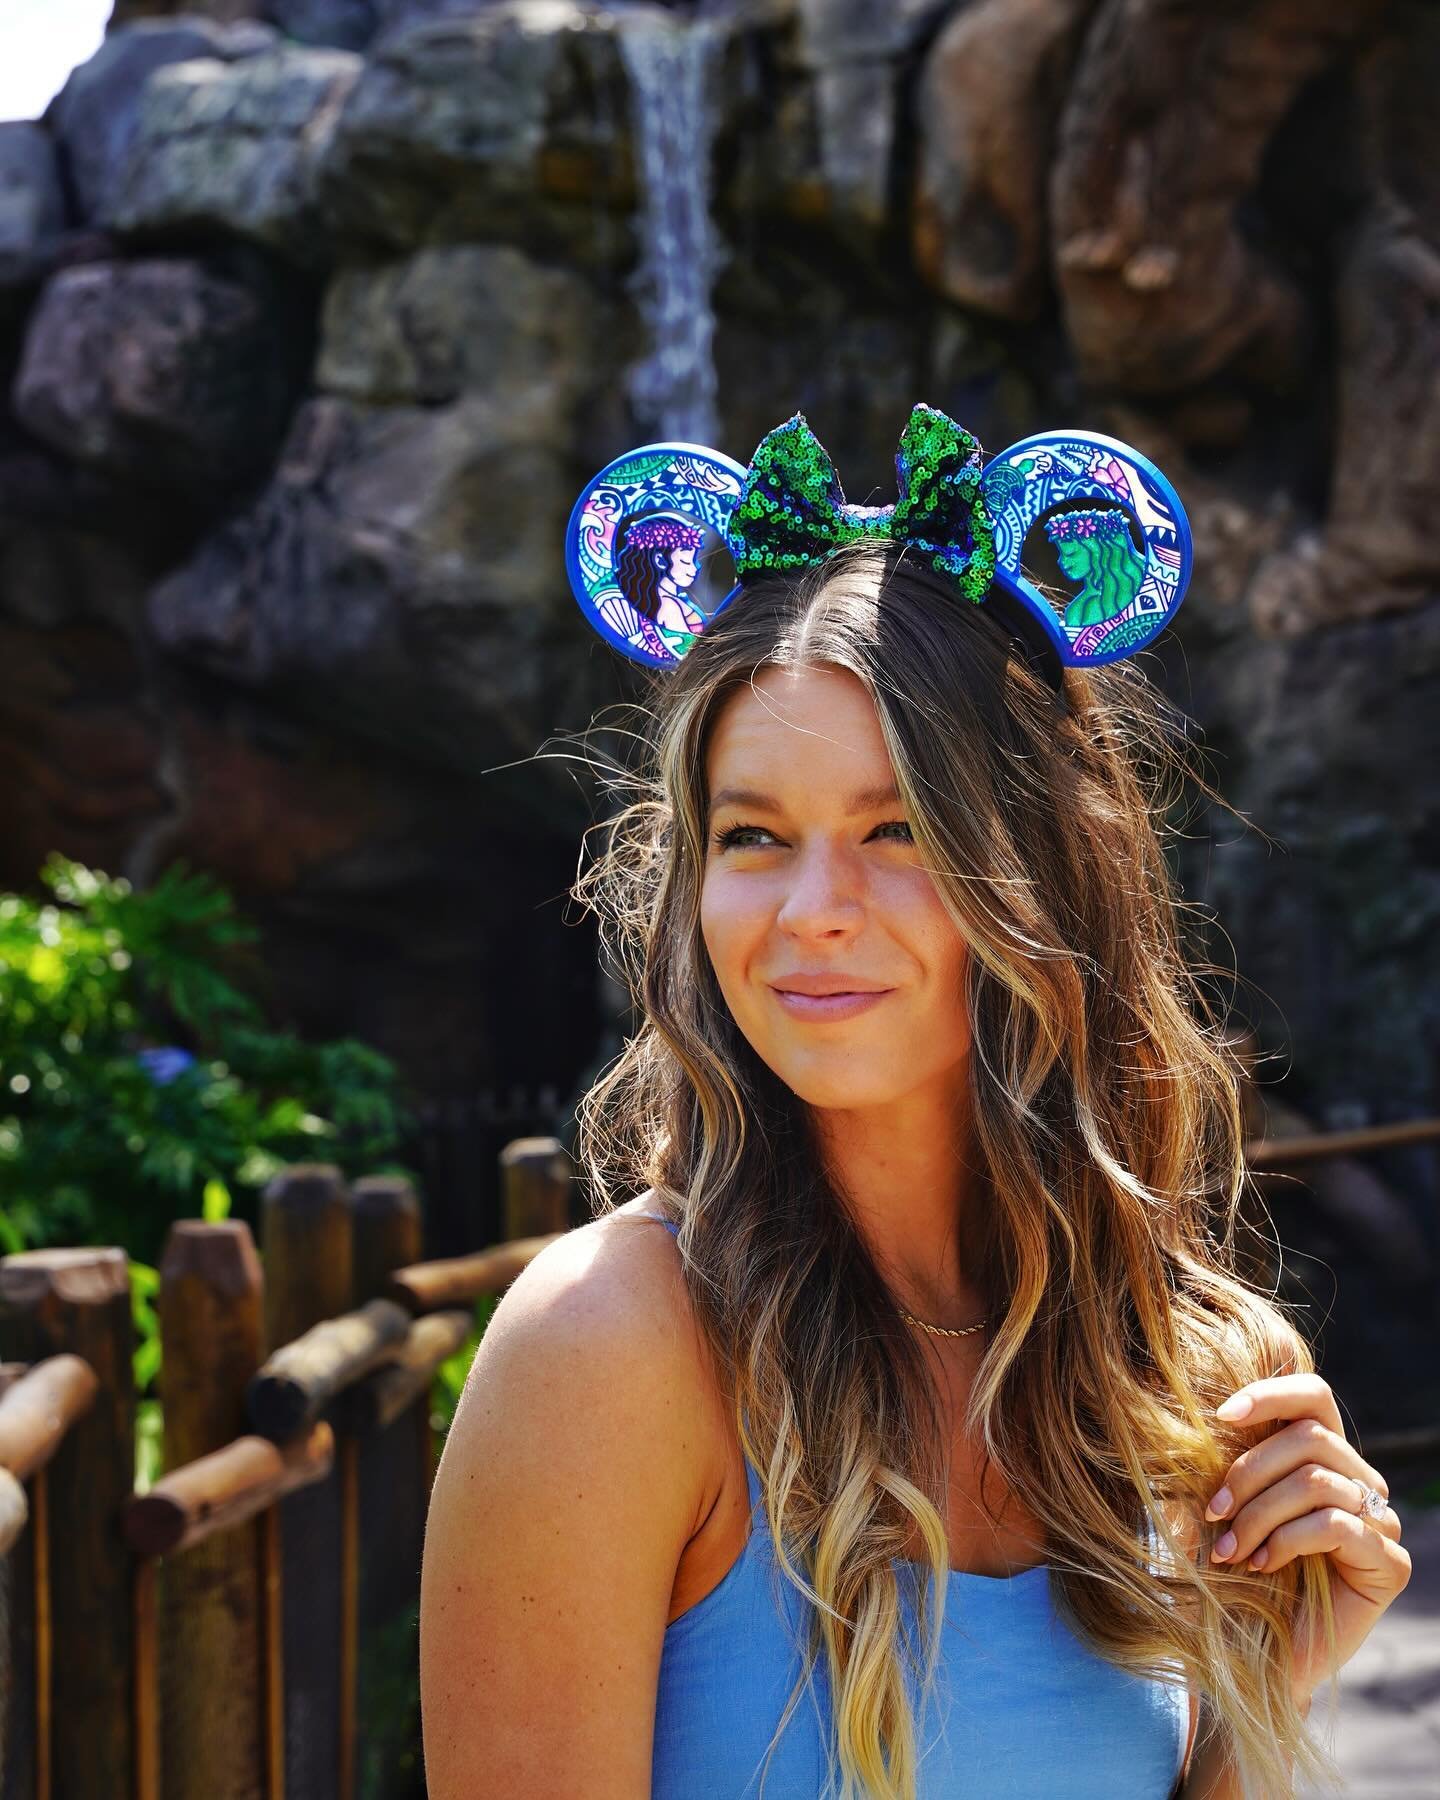 TONIGHT&rsquo;S THE NIGHT! 🌊 we have our first opening it what feels like forever as so much new for you!! Head to stories to see all the details, but here&rsquo;s a quick rundown! &bull;
🌀Wayfinder Princess ears &bull;
💚 Muppet Show ears &bull;
?